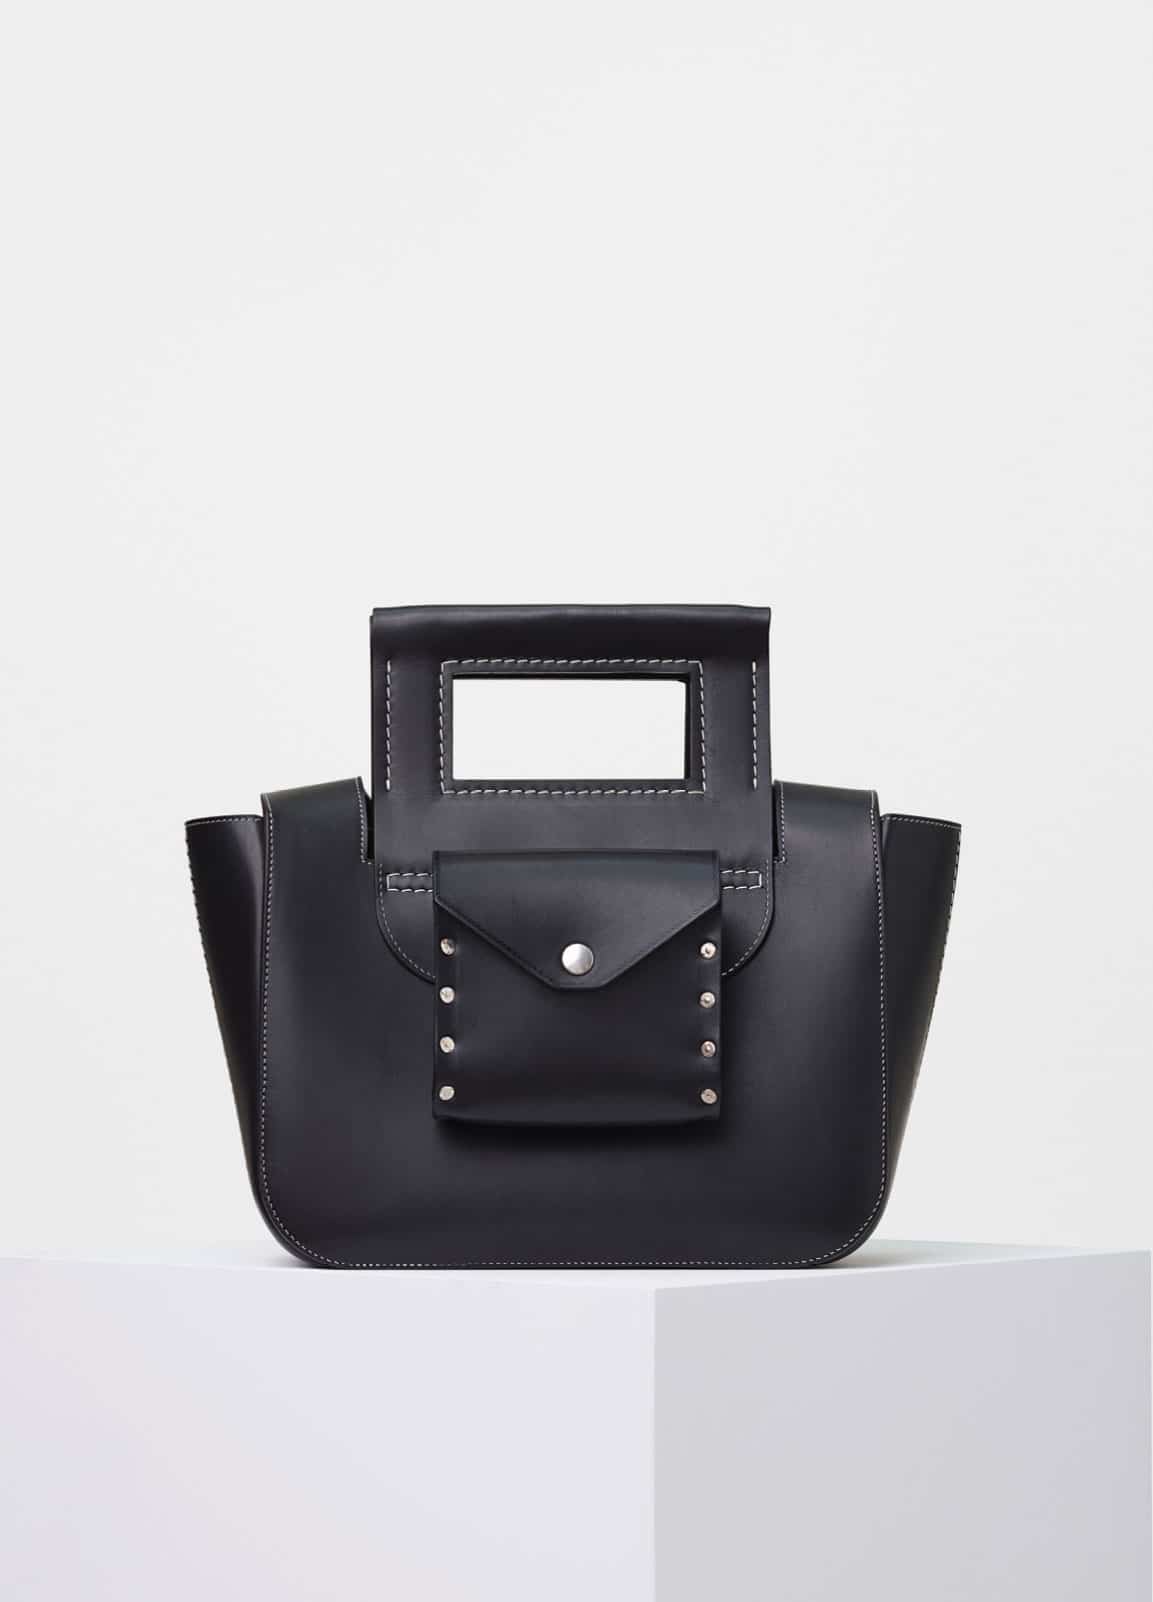 celine tote bags leather - Celine Bag Price List Reference Guide | Spotted Fashion